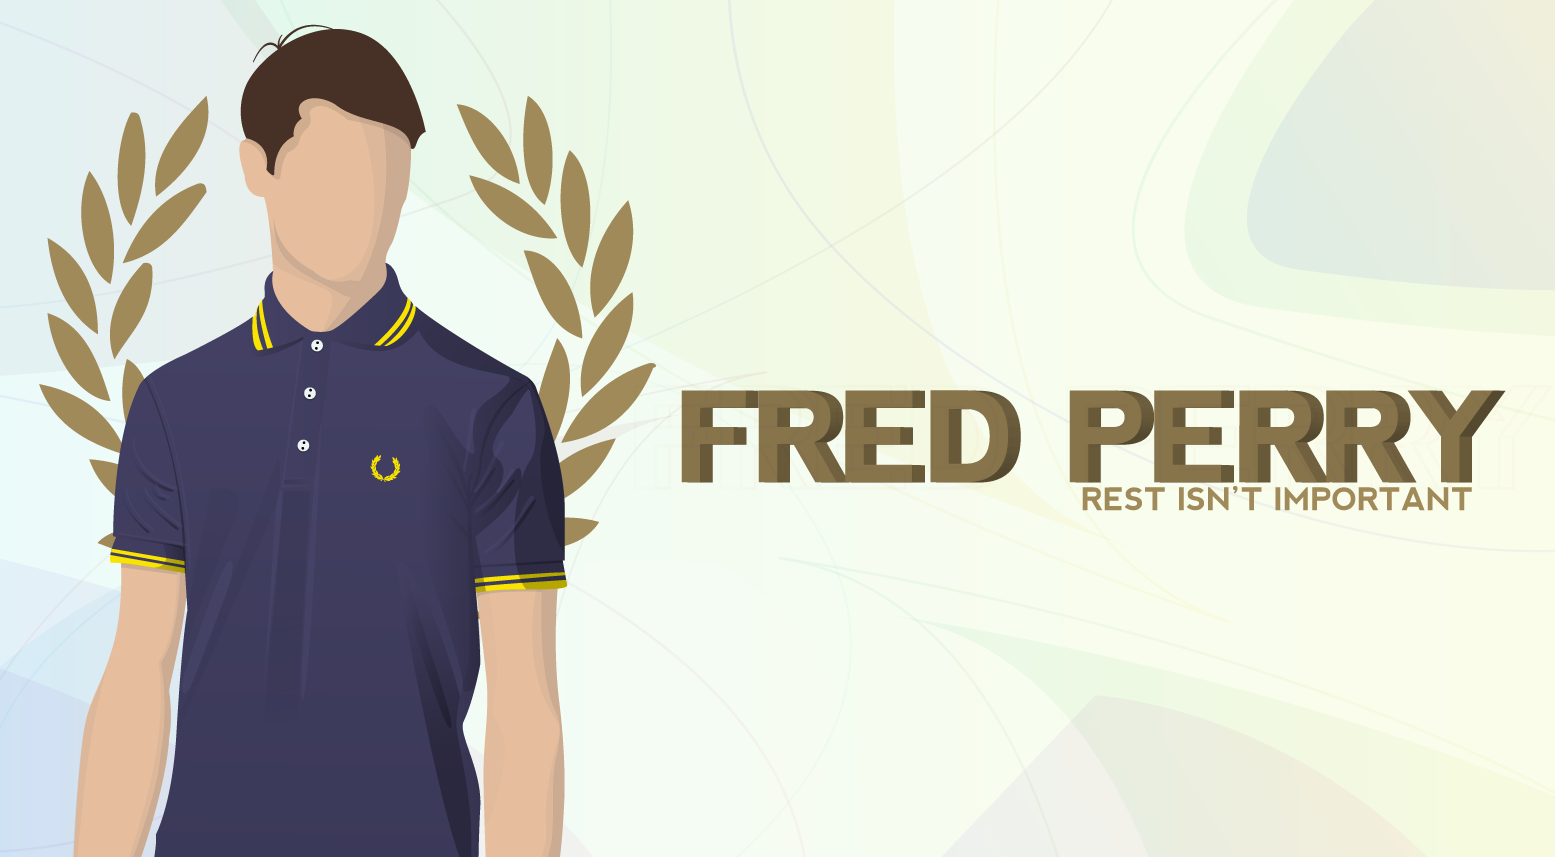 http://fc01.deviantart.net/fs49/f/2009/199/3/1/Fred_Perry_by_tapeGFX.png